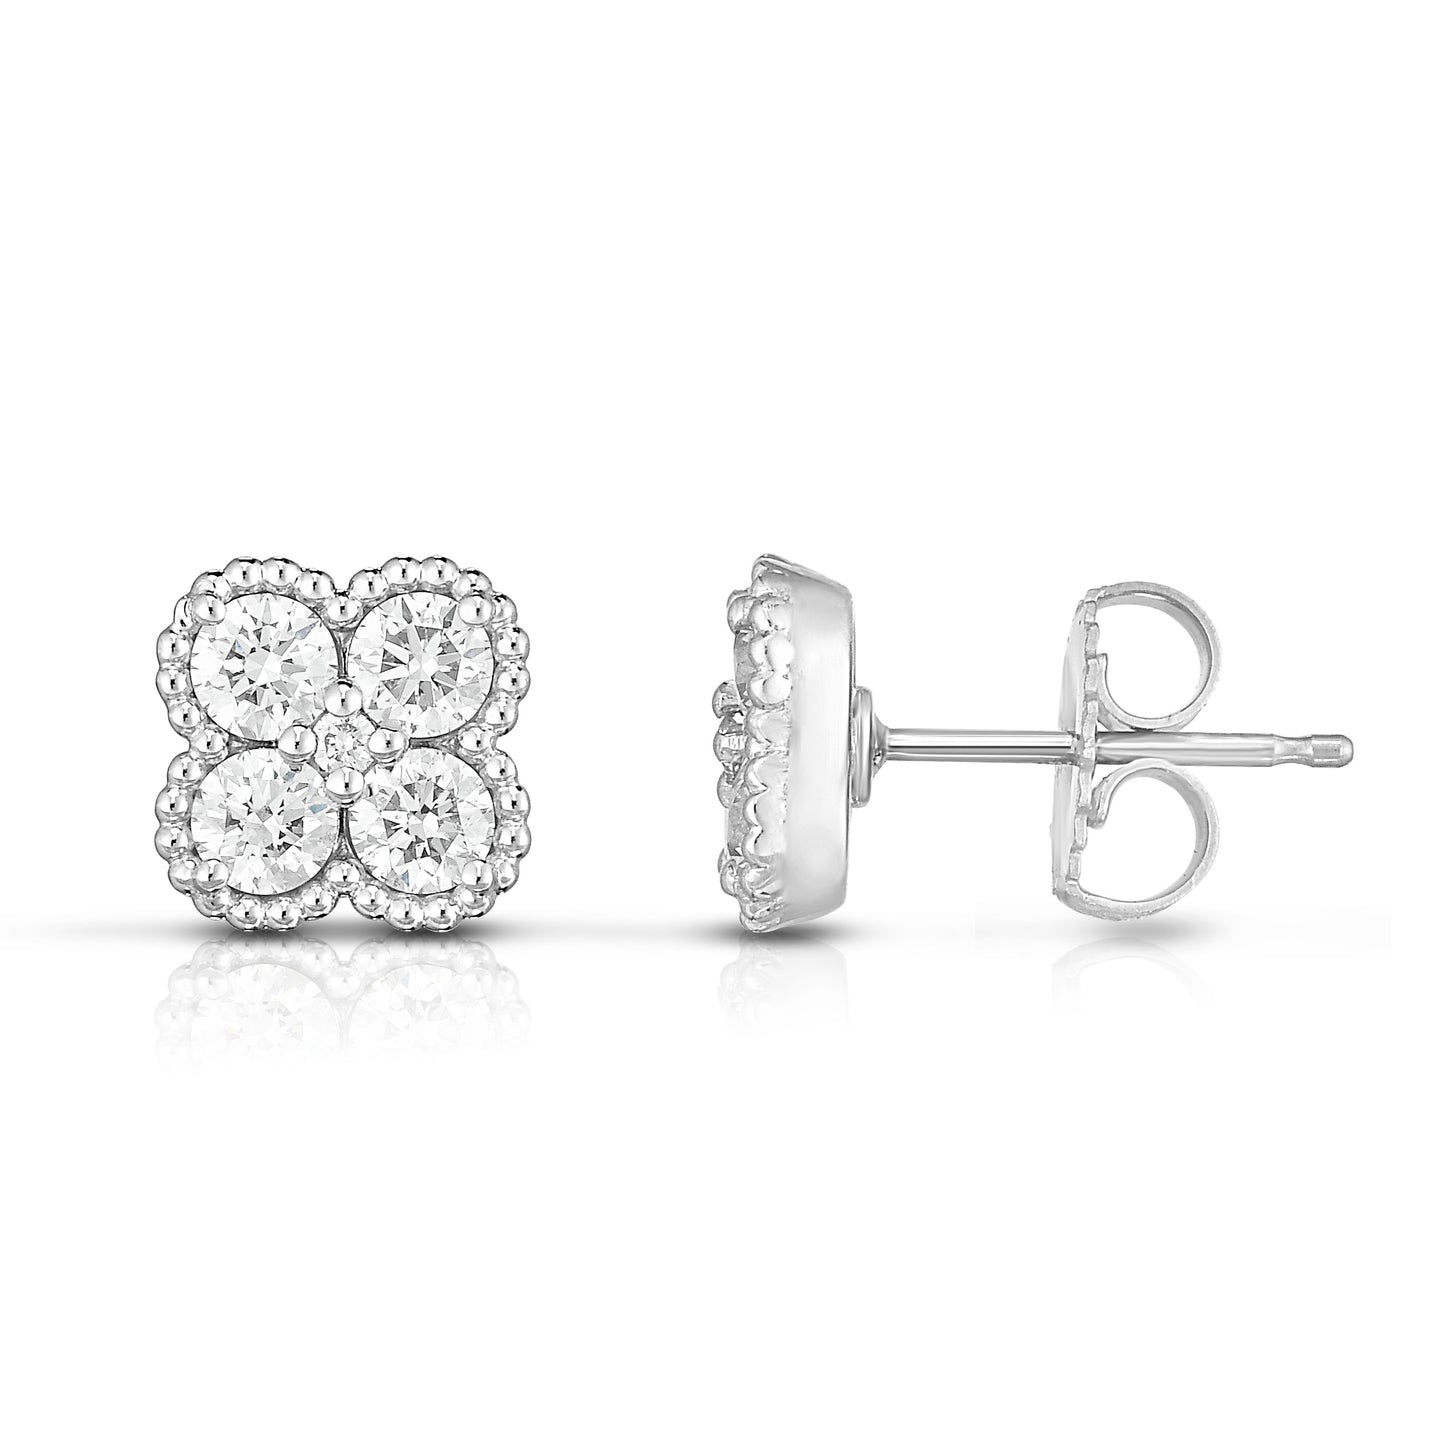 Sabel Collection 14K White Gold Diamond Stud Earrings with Milgrain Accents